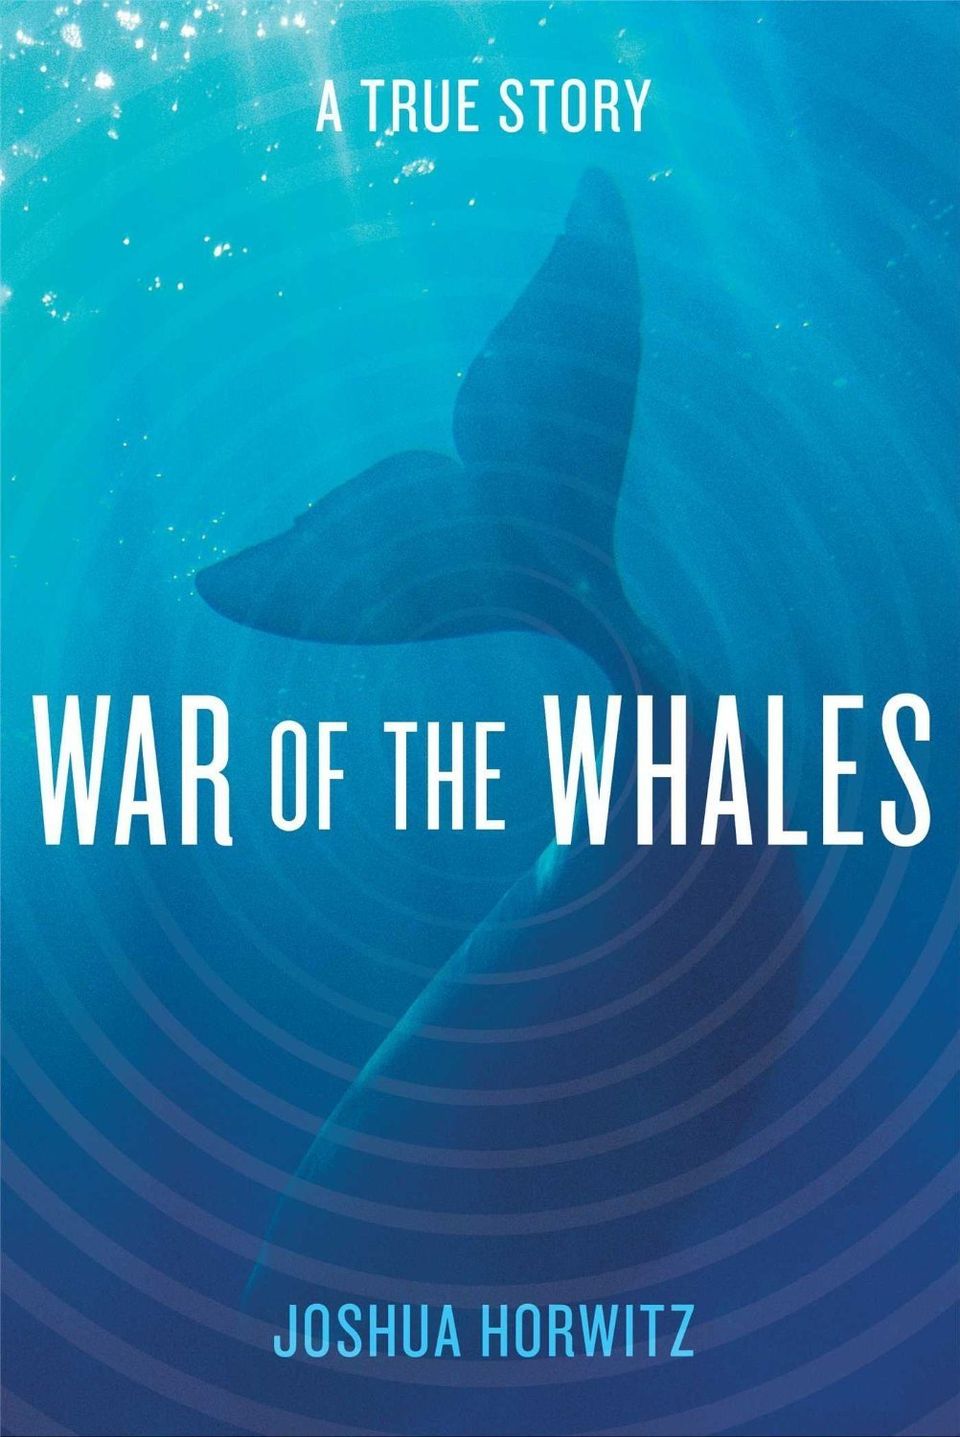 'War of the Whales: A True Story' by Joshua Horwitz